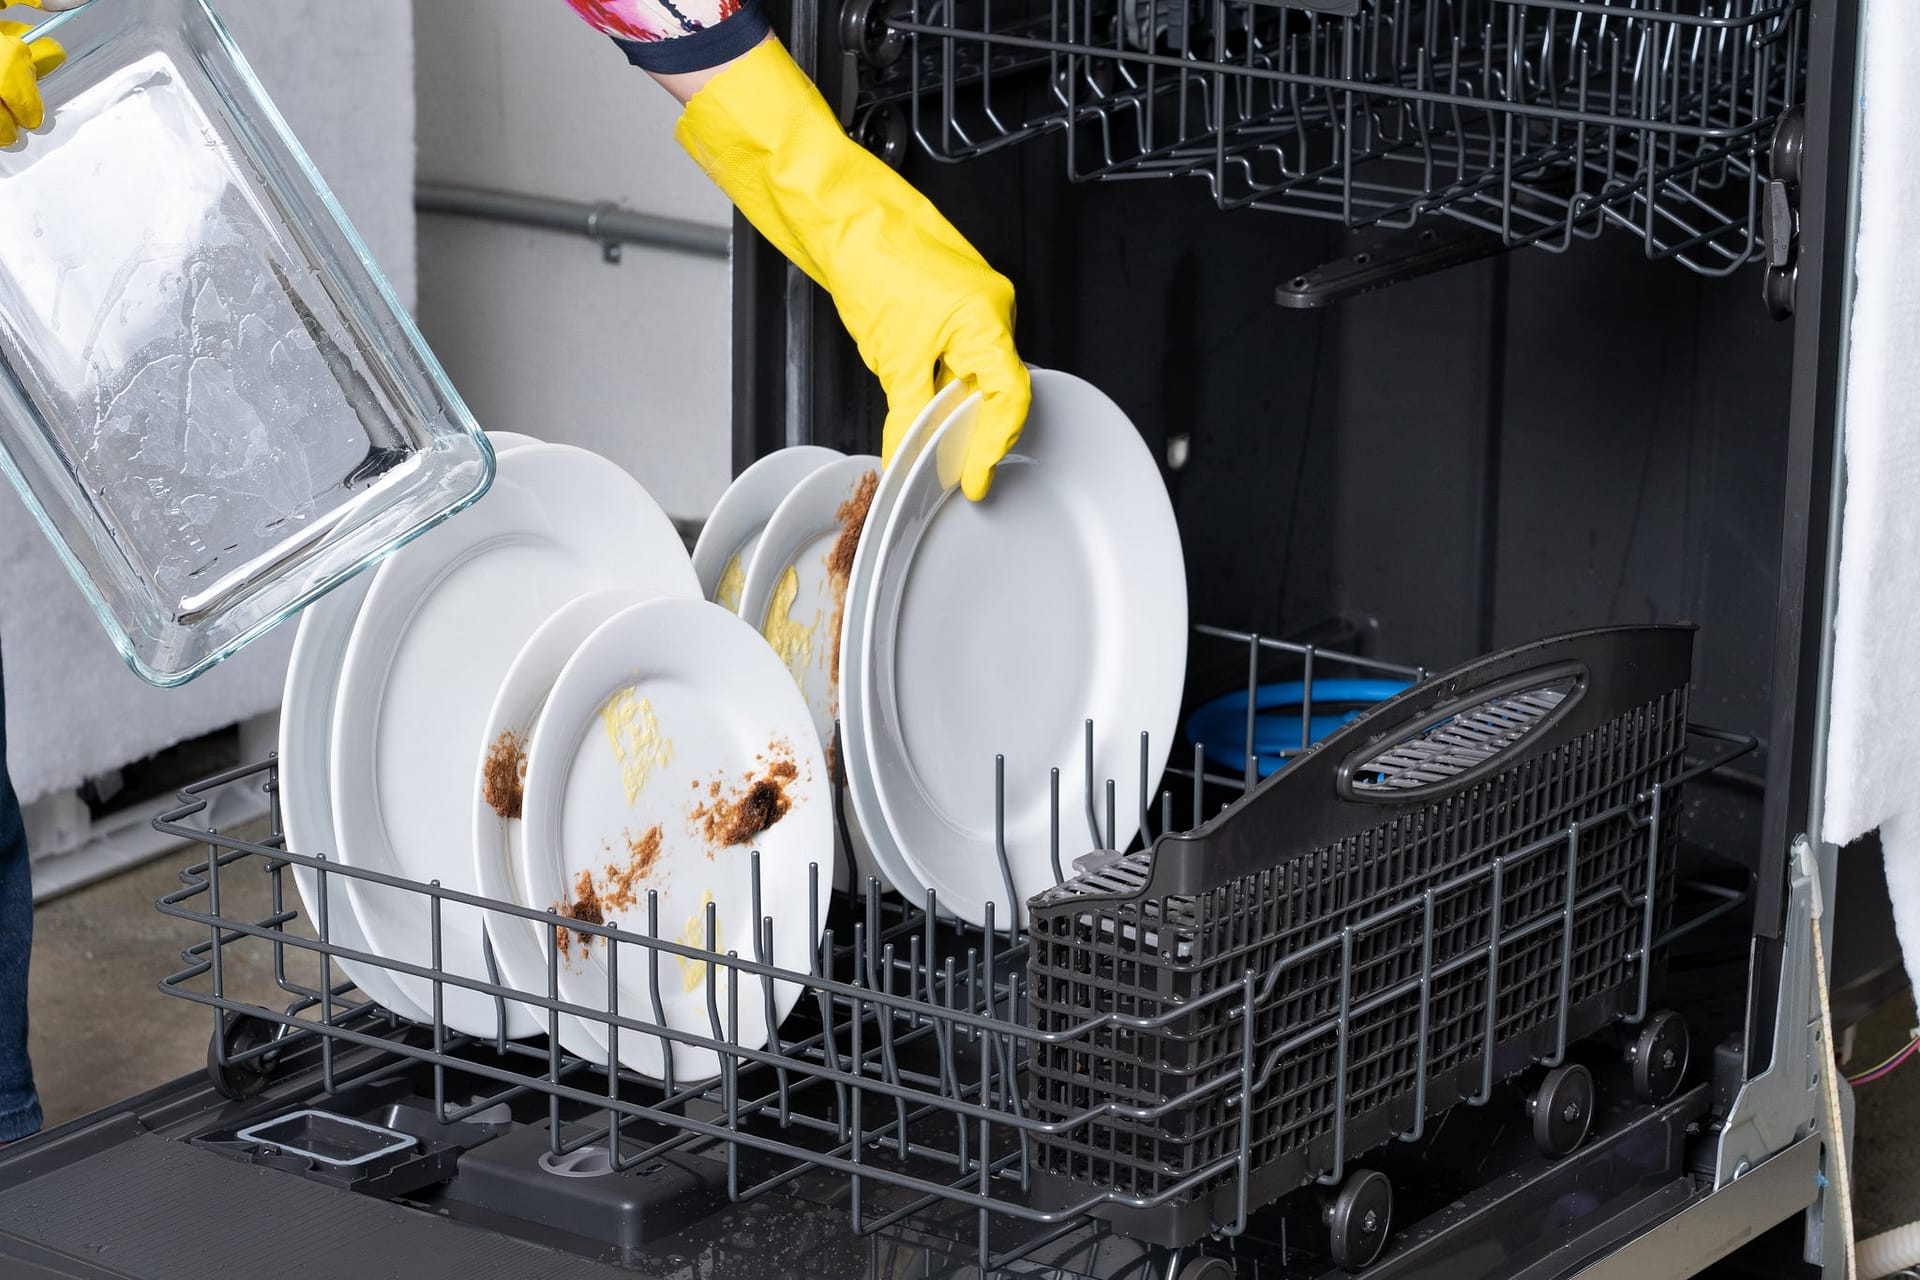 Dishwasher Not Filling With Water: 6 Easy Ways To Fix It Now